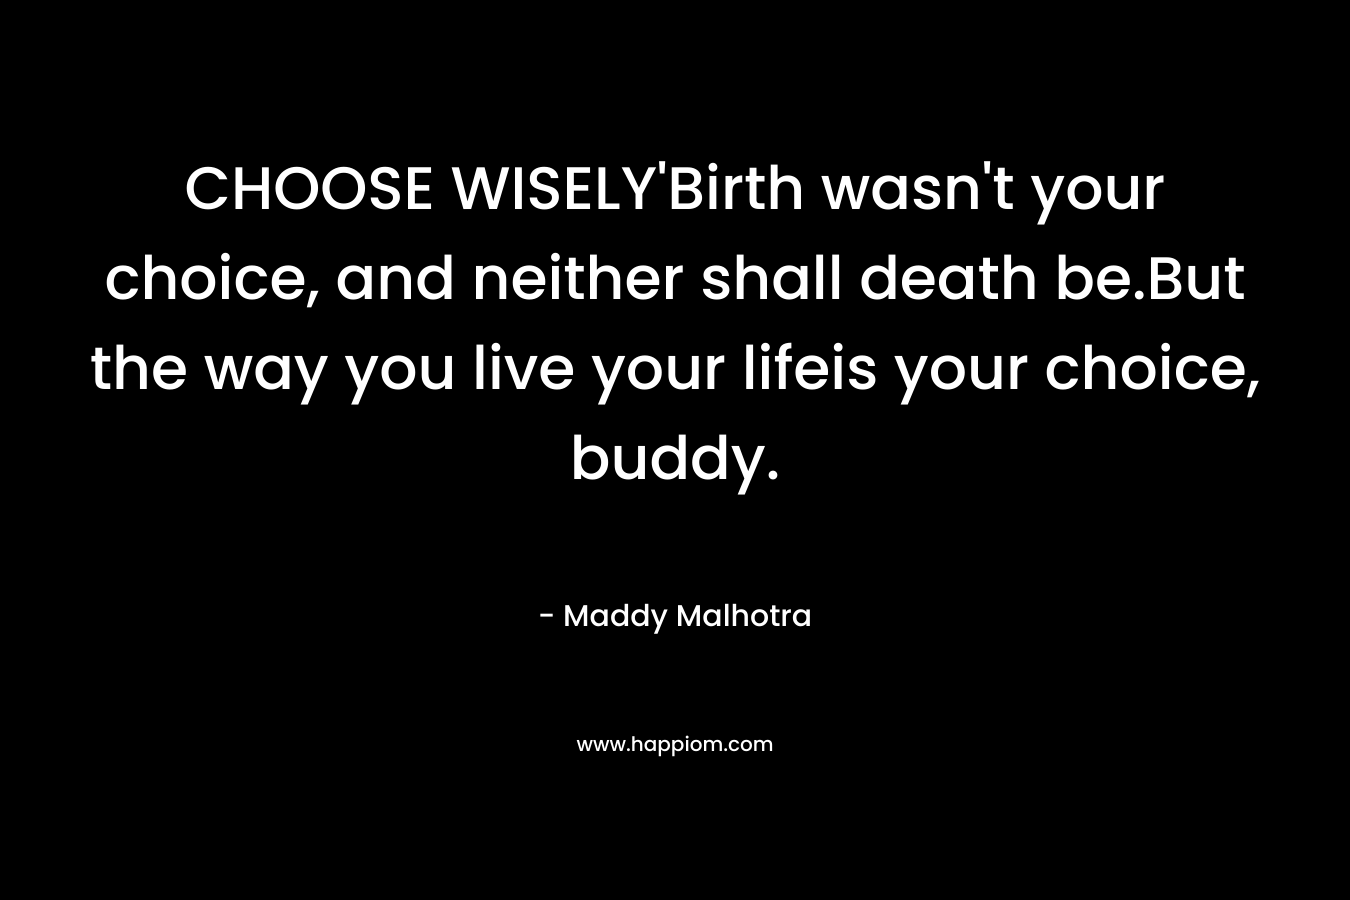 CHOOSE WISELY'Birth wasn't your choice, and neither shall death be.But the way you live your lifeis your choice, buddy.